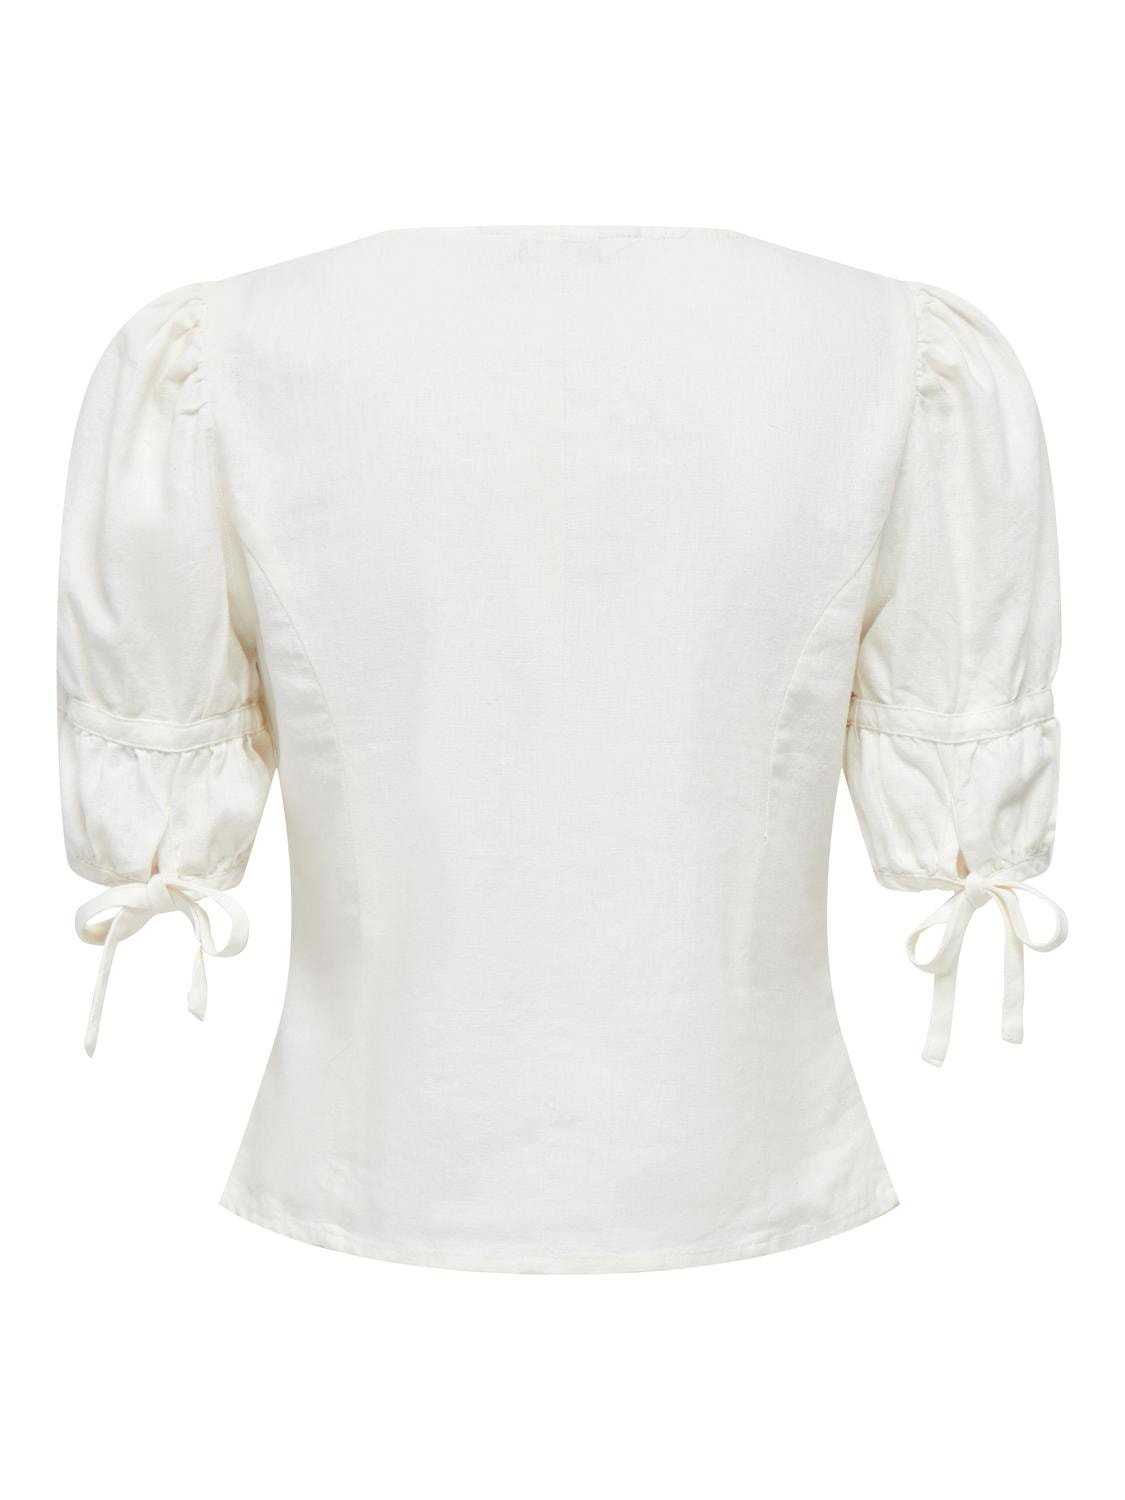 ONLY v-neck top with puff sleeves -Cloud Dancer - 15311005